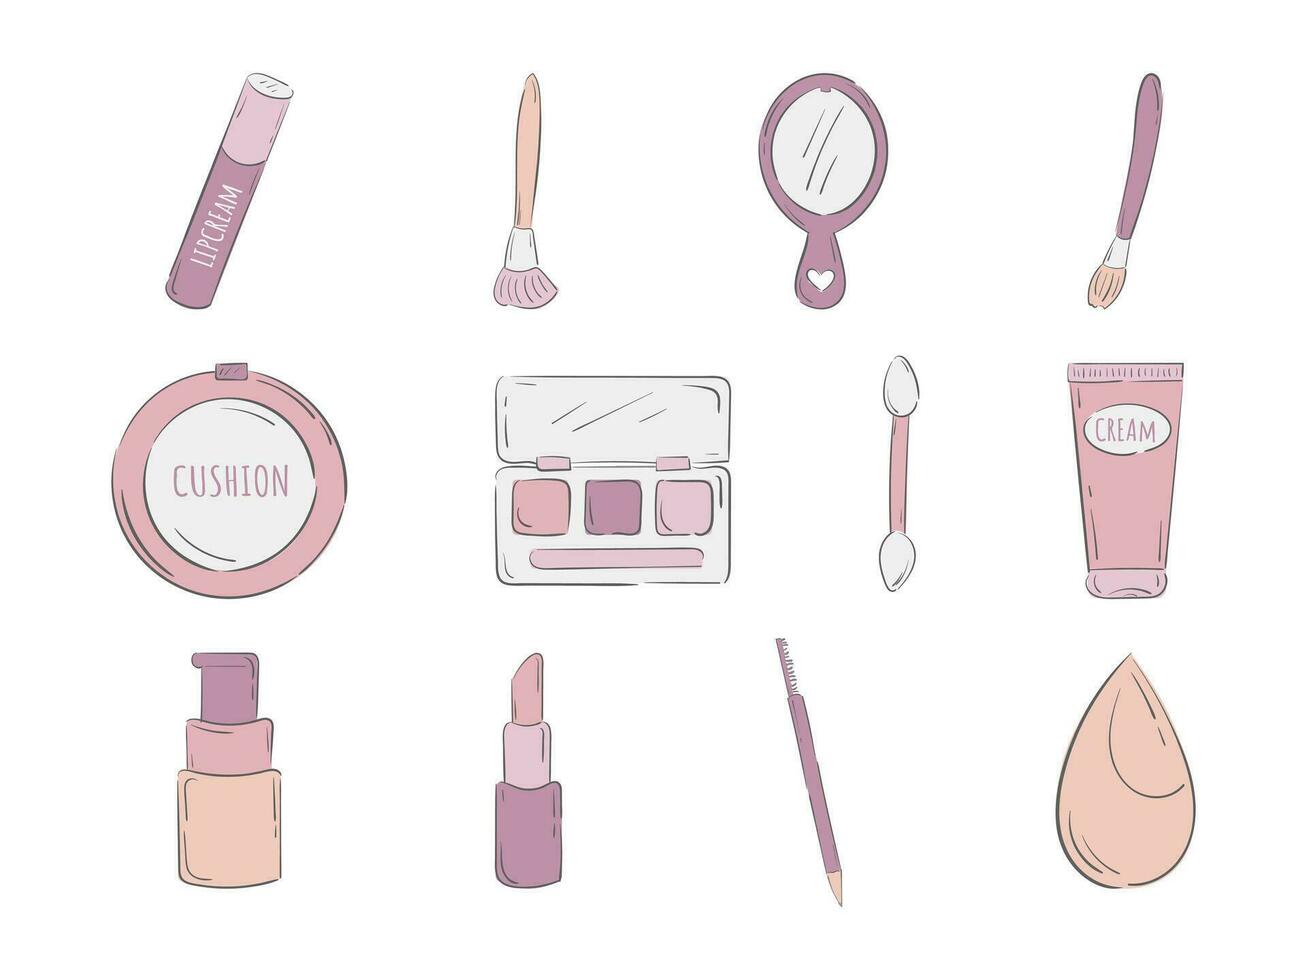 Set of Different Packages for Cosmetics Illustration. Makeup Tools Vector Icons Collection. Cartoon Doodle Line Art.